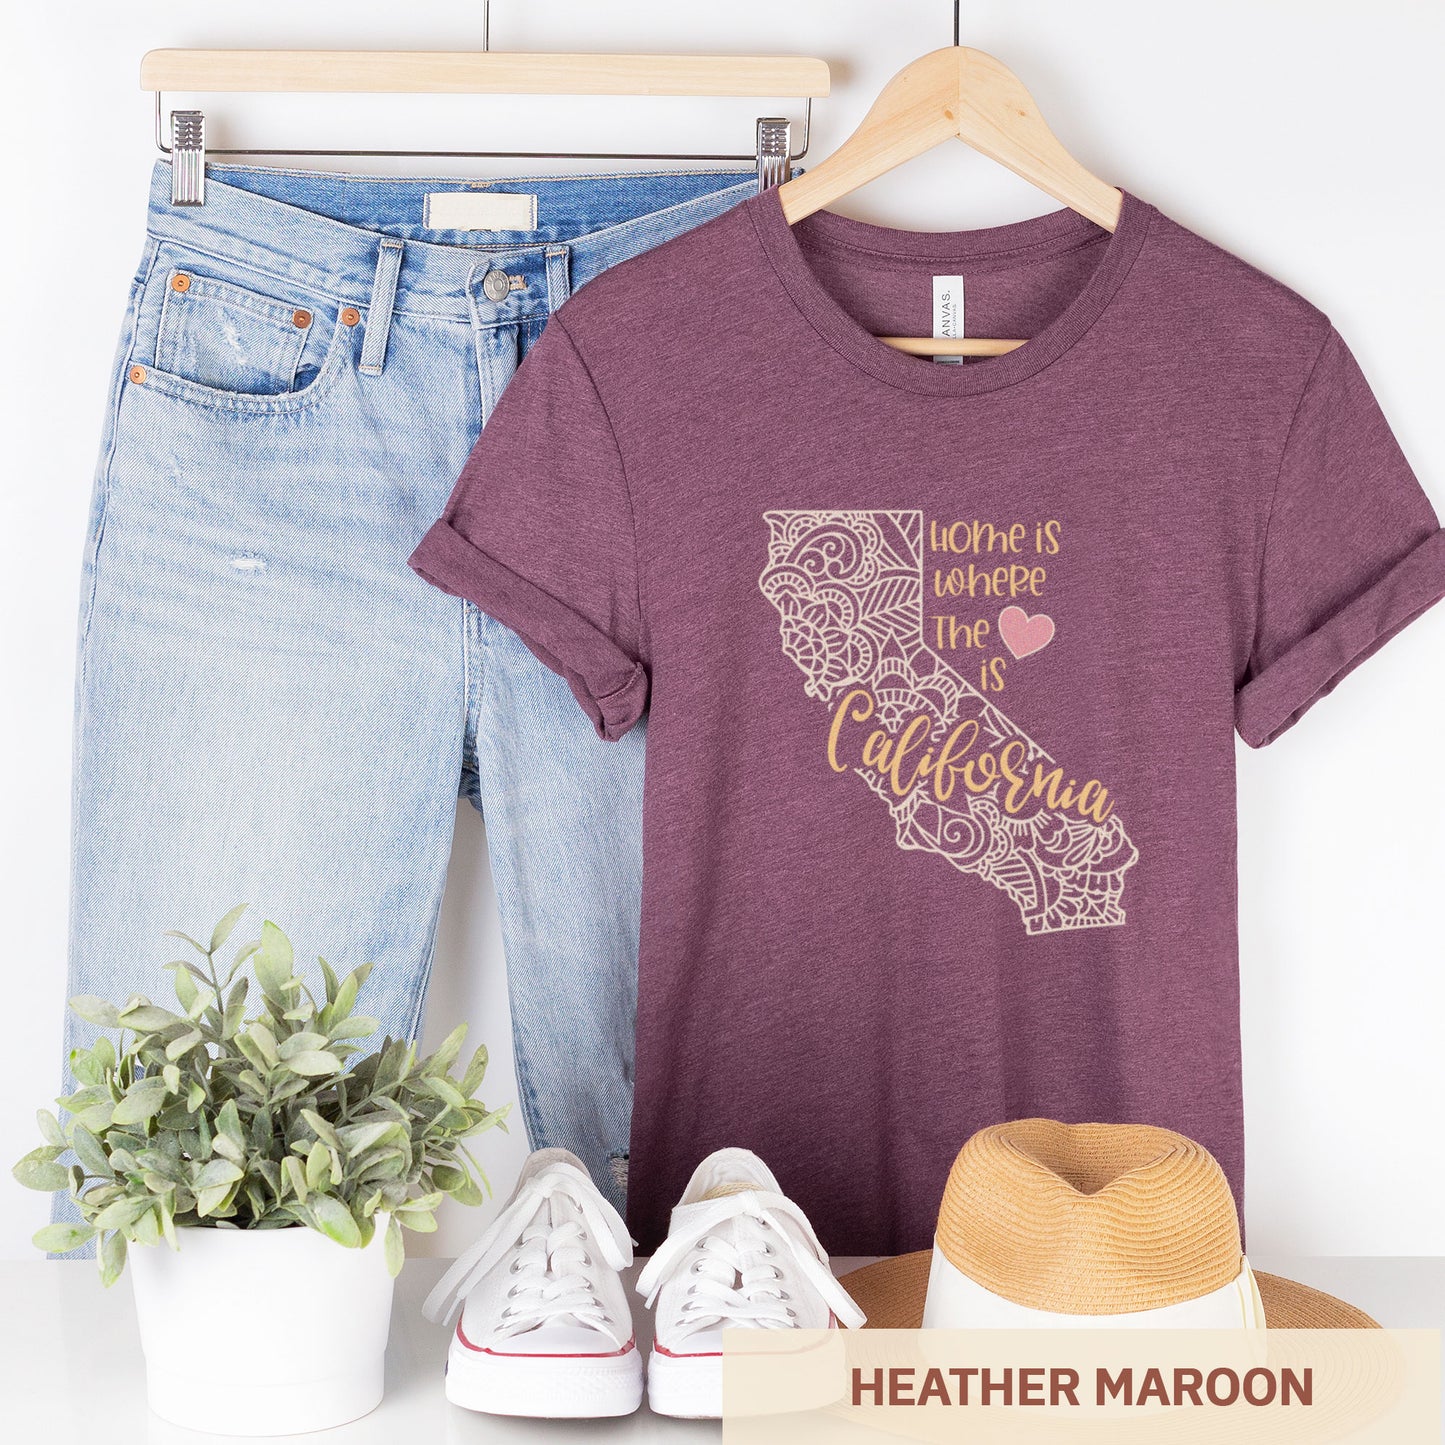 A hanging heather maroon Bella Canvas t-shirt featuring a mandala in the shape of California with the words home is where the heart is.